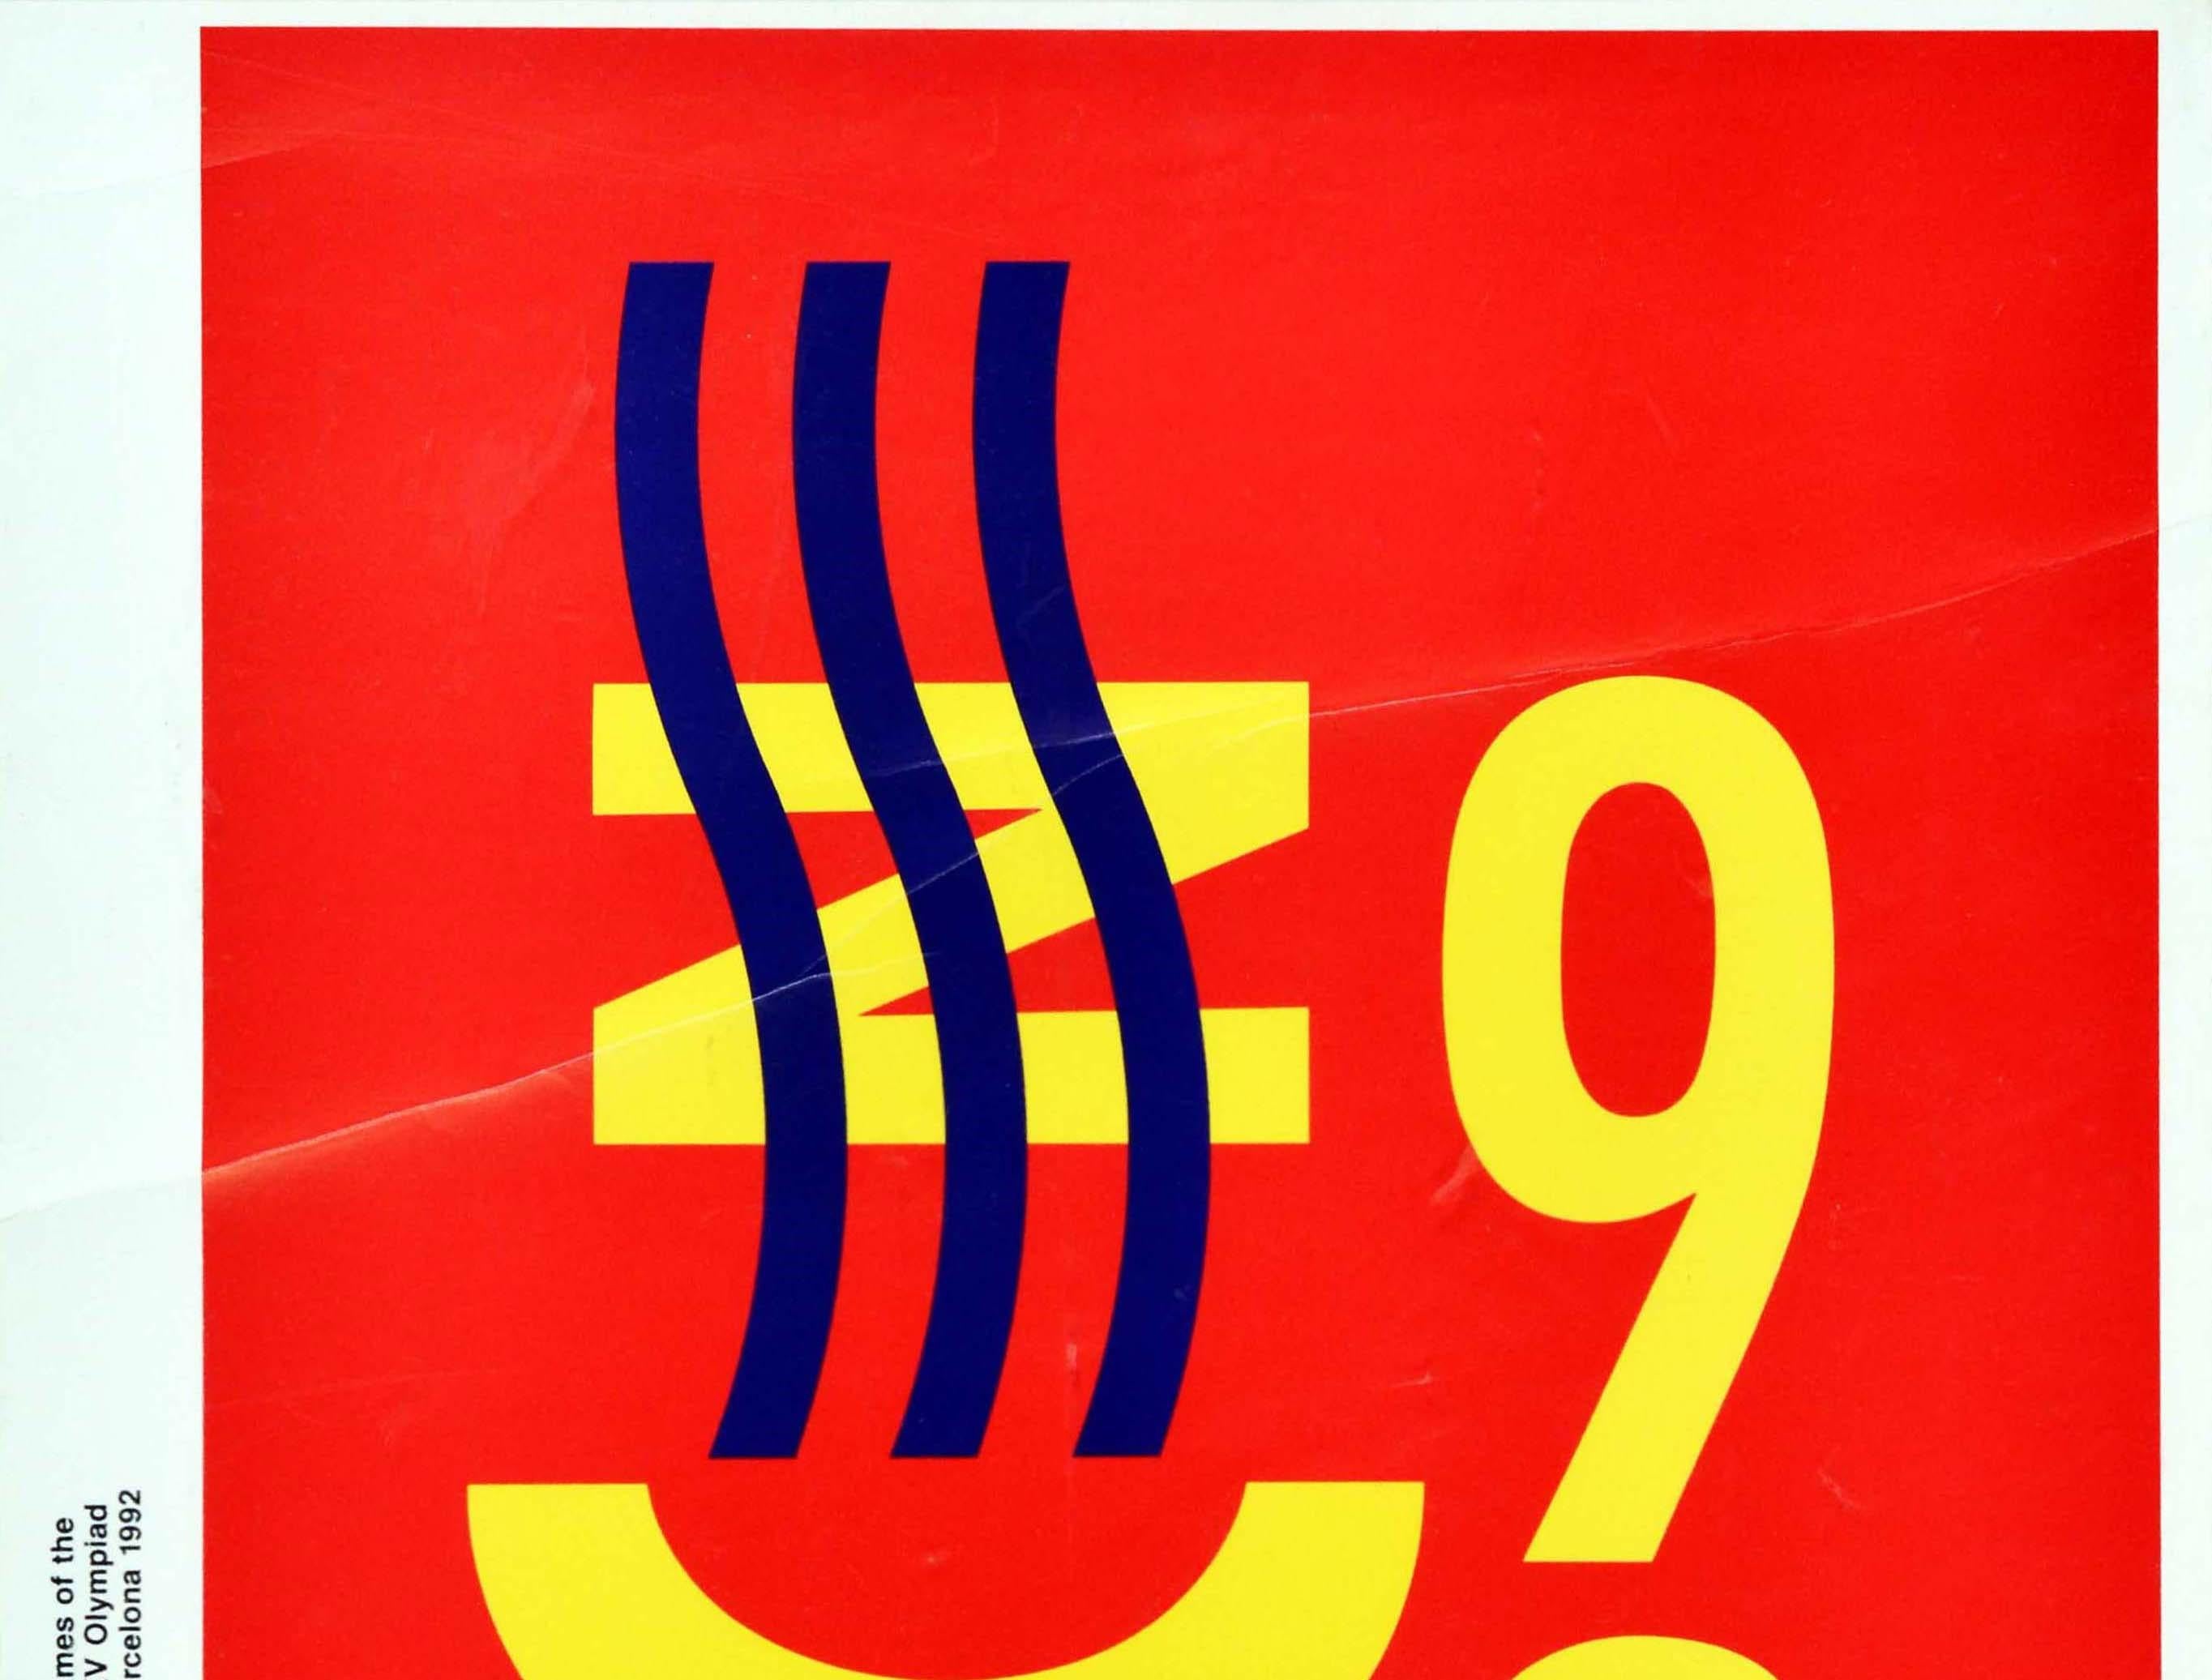 Original vintage sport poster for the 1992 Summer Olympics held in Barcelona Spain / Games of the XXV Olympiad held from 25 July to 9 August featuring a great graphic design depicting a stylised Olympic flame over the bold yellow letters BCN for